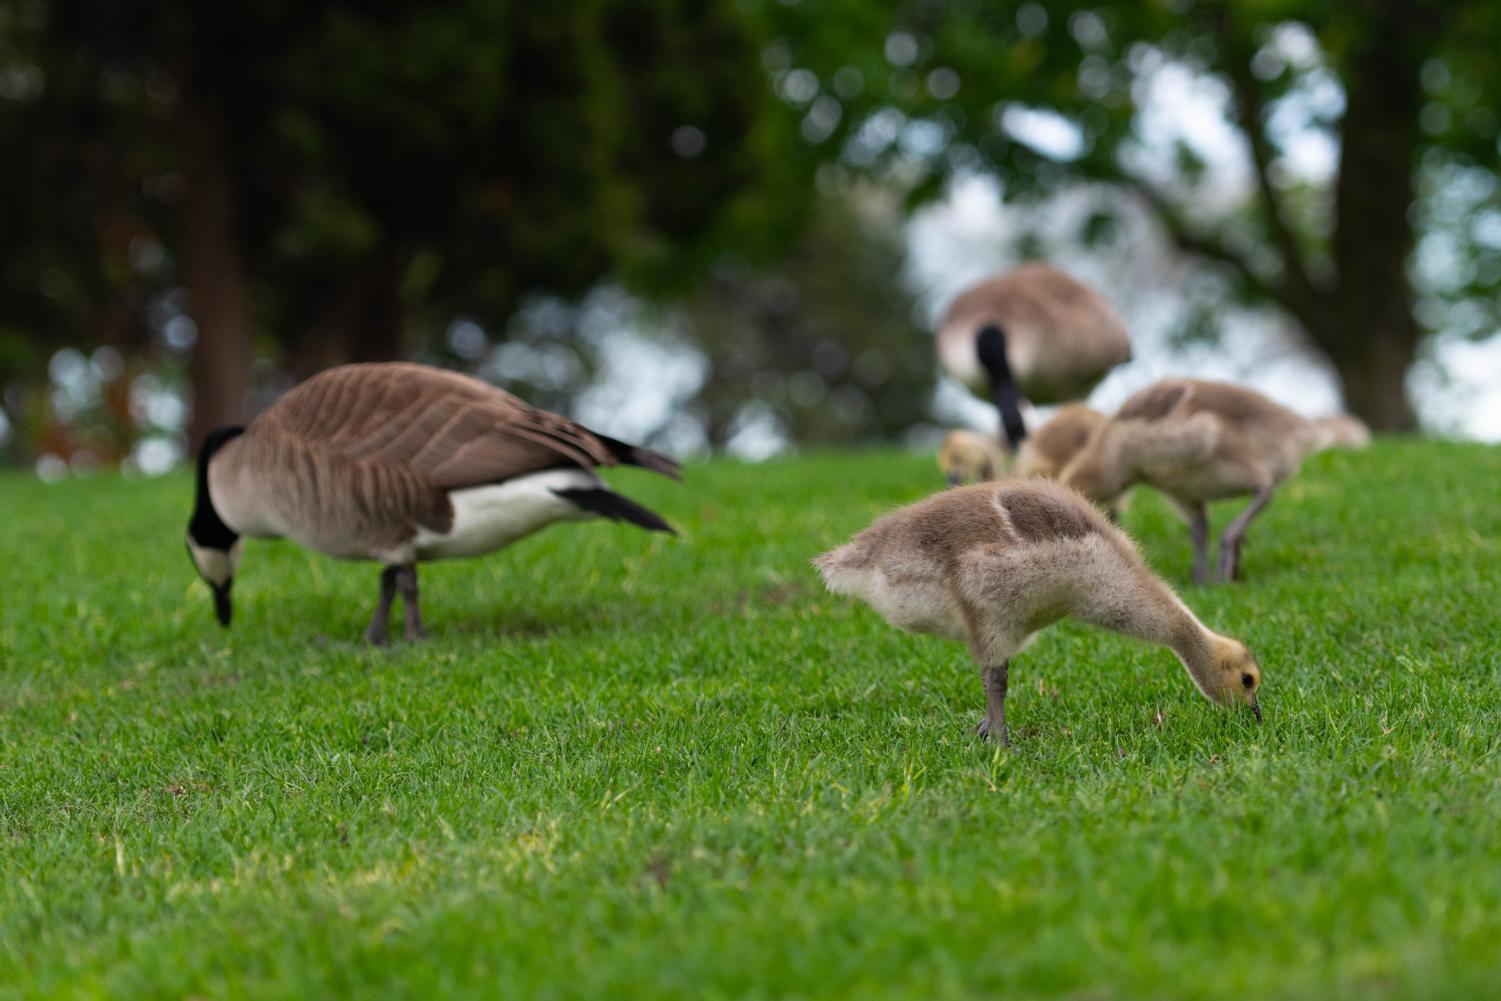 Goslings and geese walk on grass.